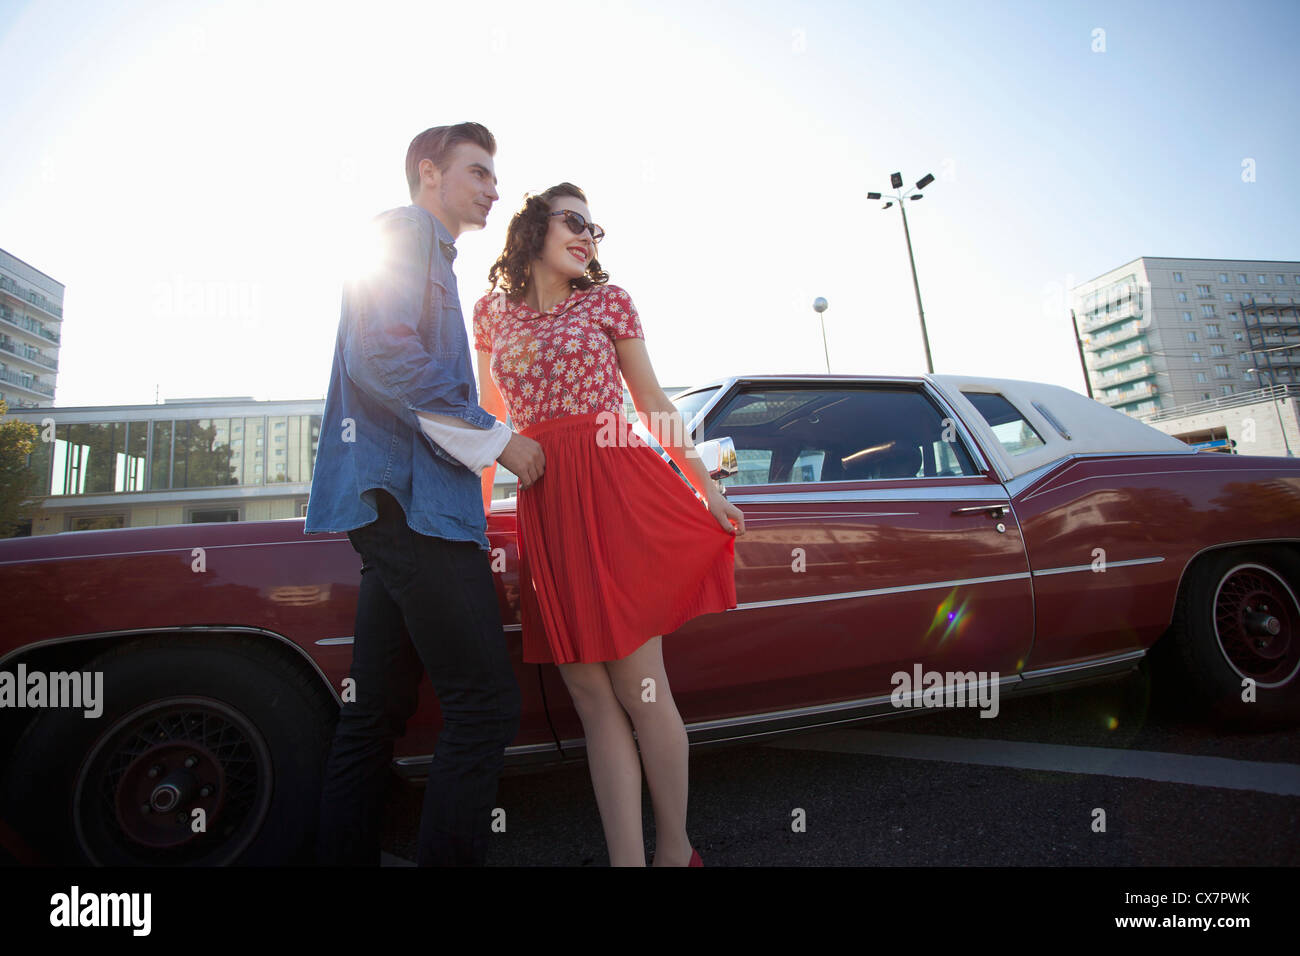 A cheerful rockabilly couple standing next to a vintage car Stock Photo